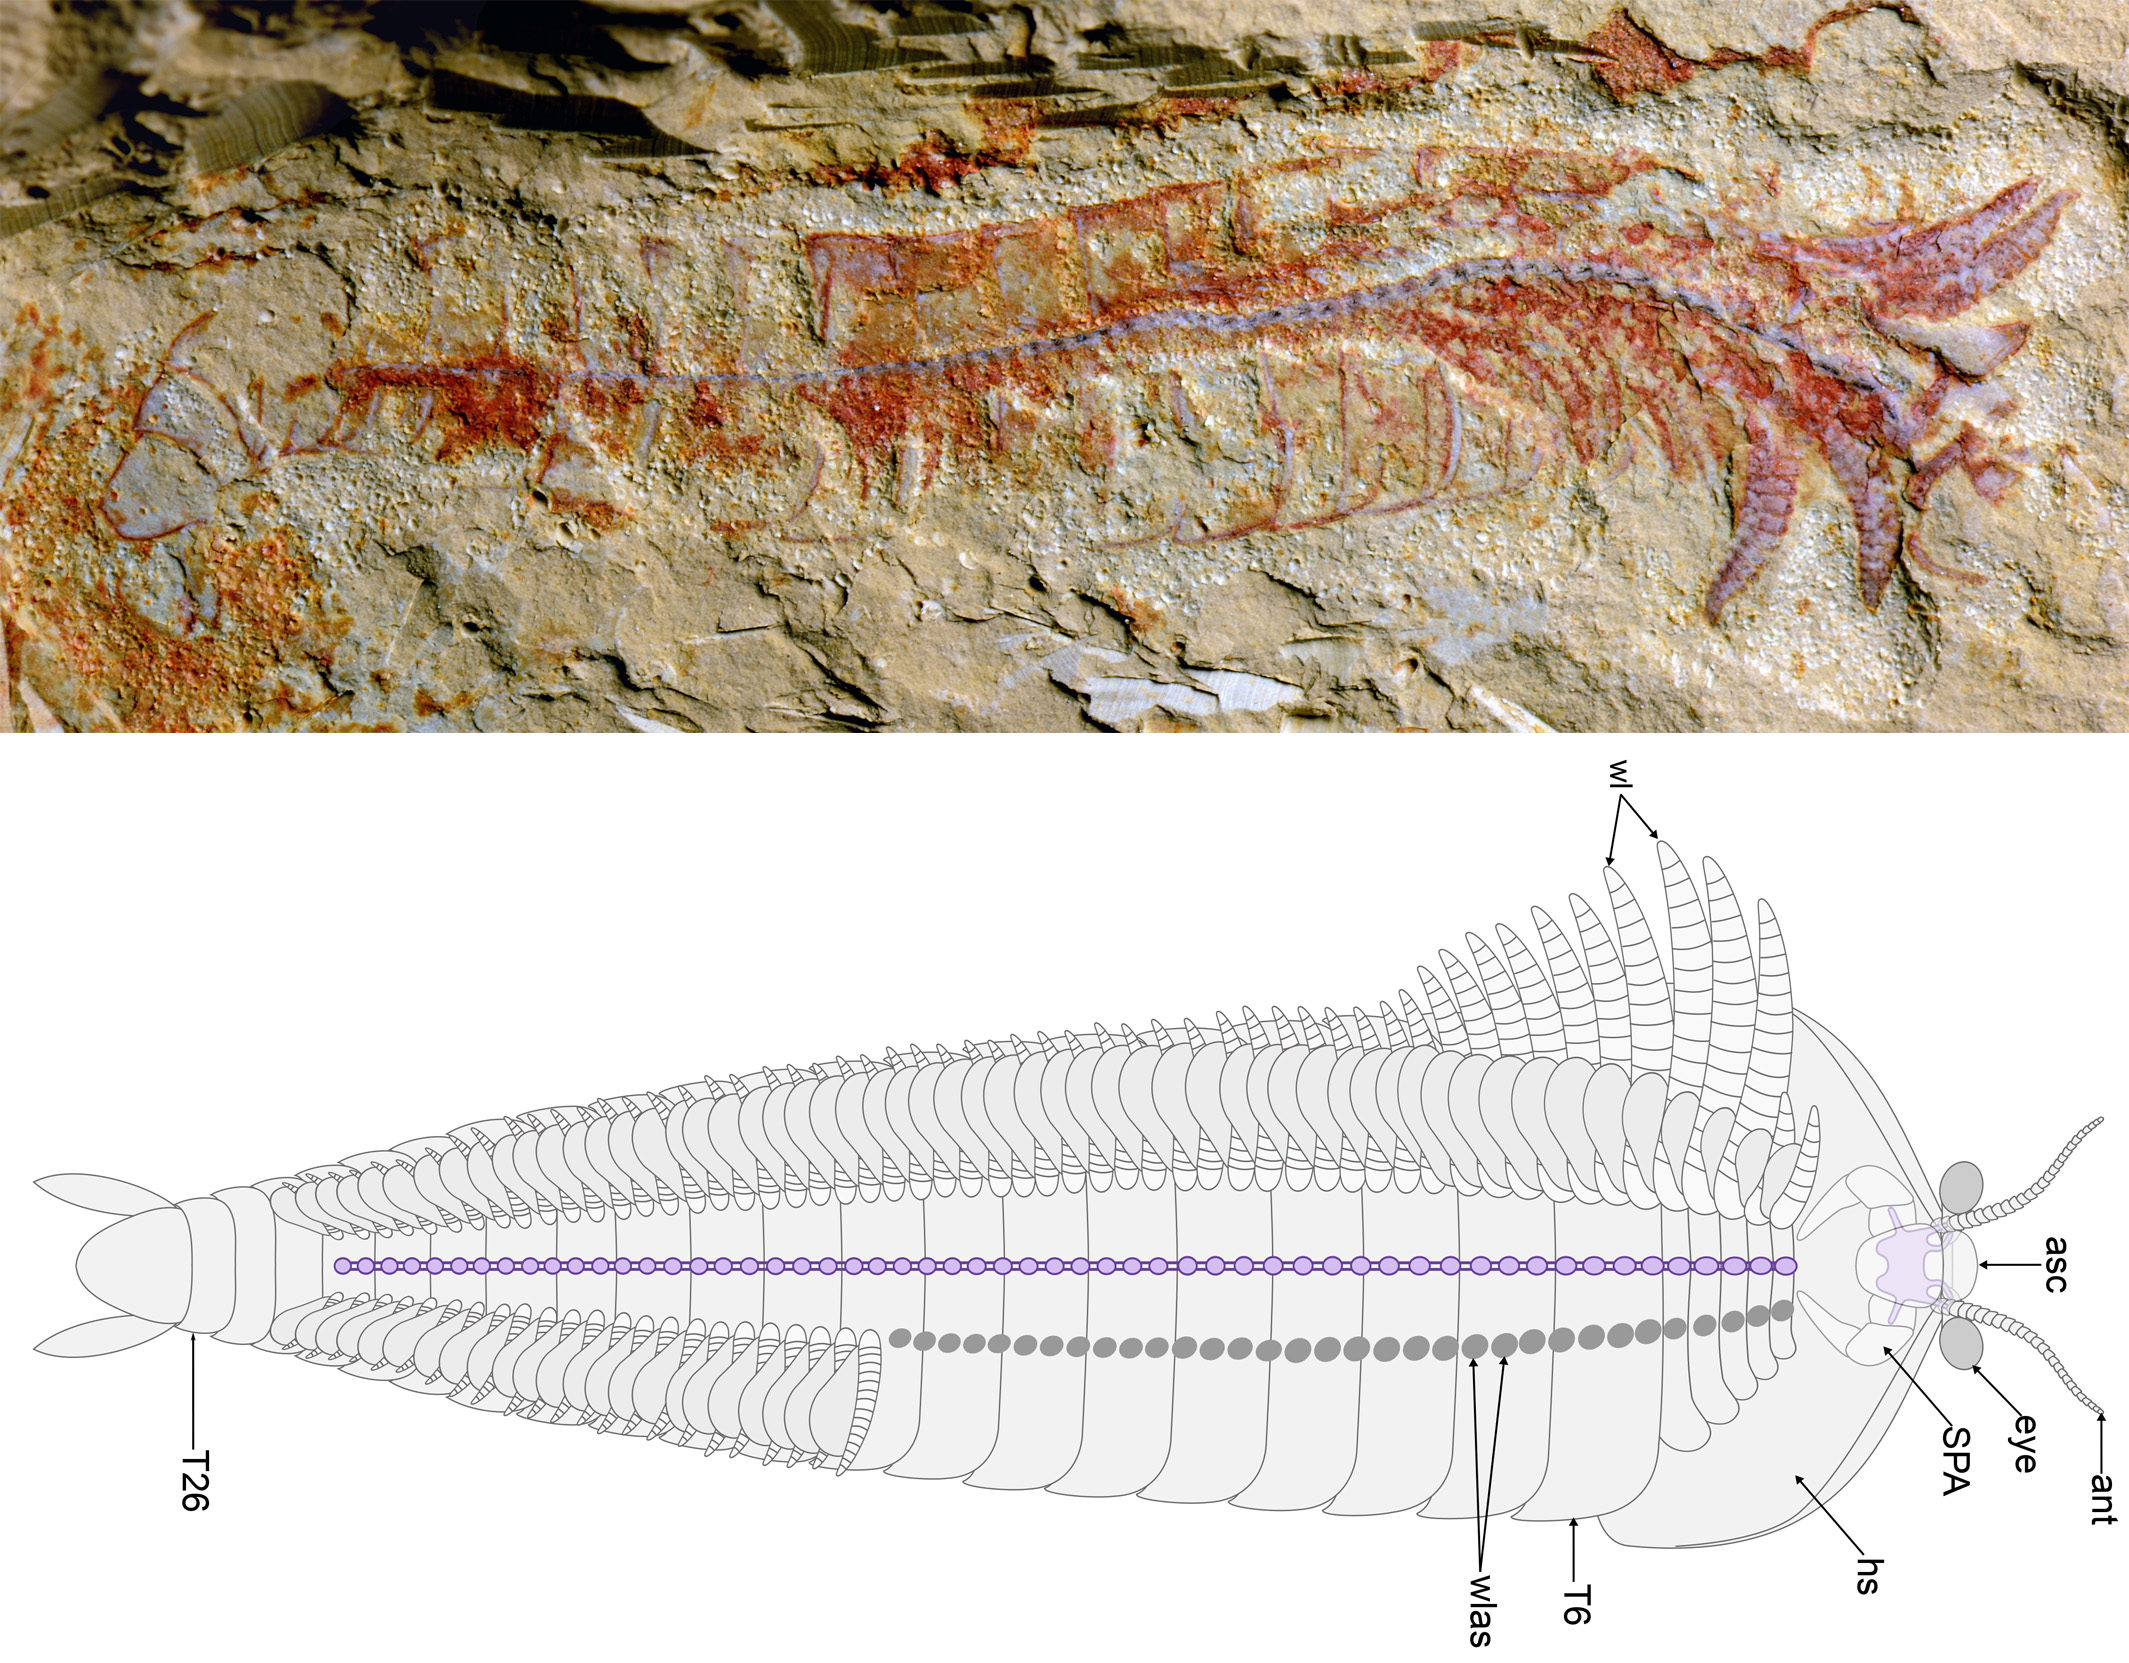 This 520 Million-Year-Old Fossil Is So Intricate You Can See Individual Nerves